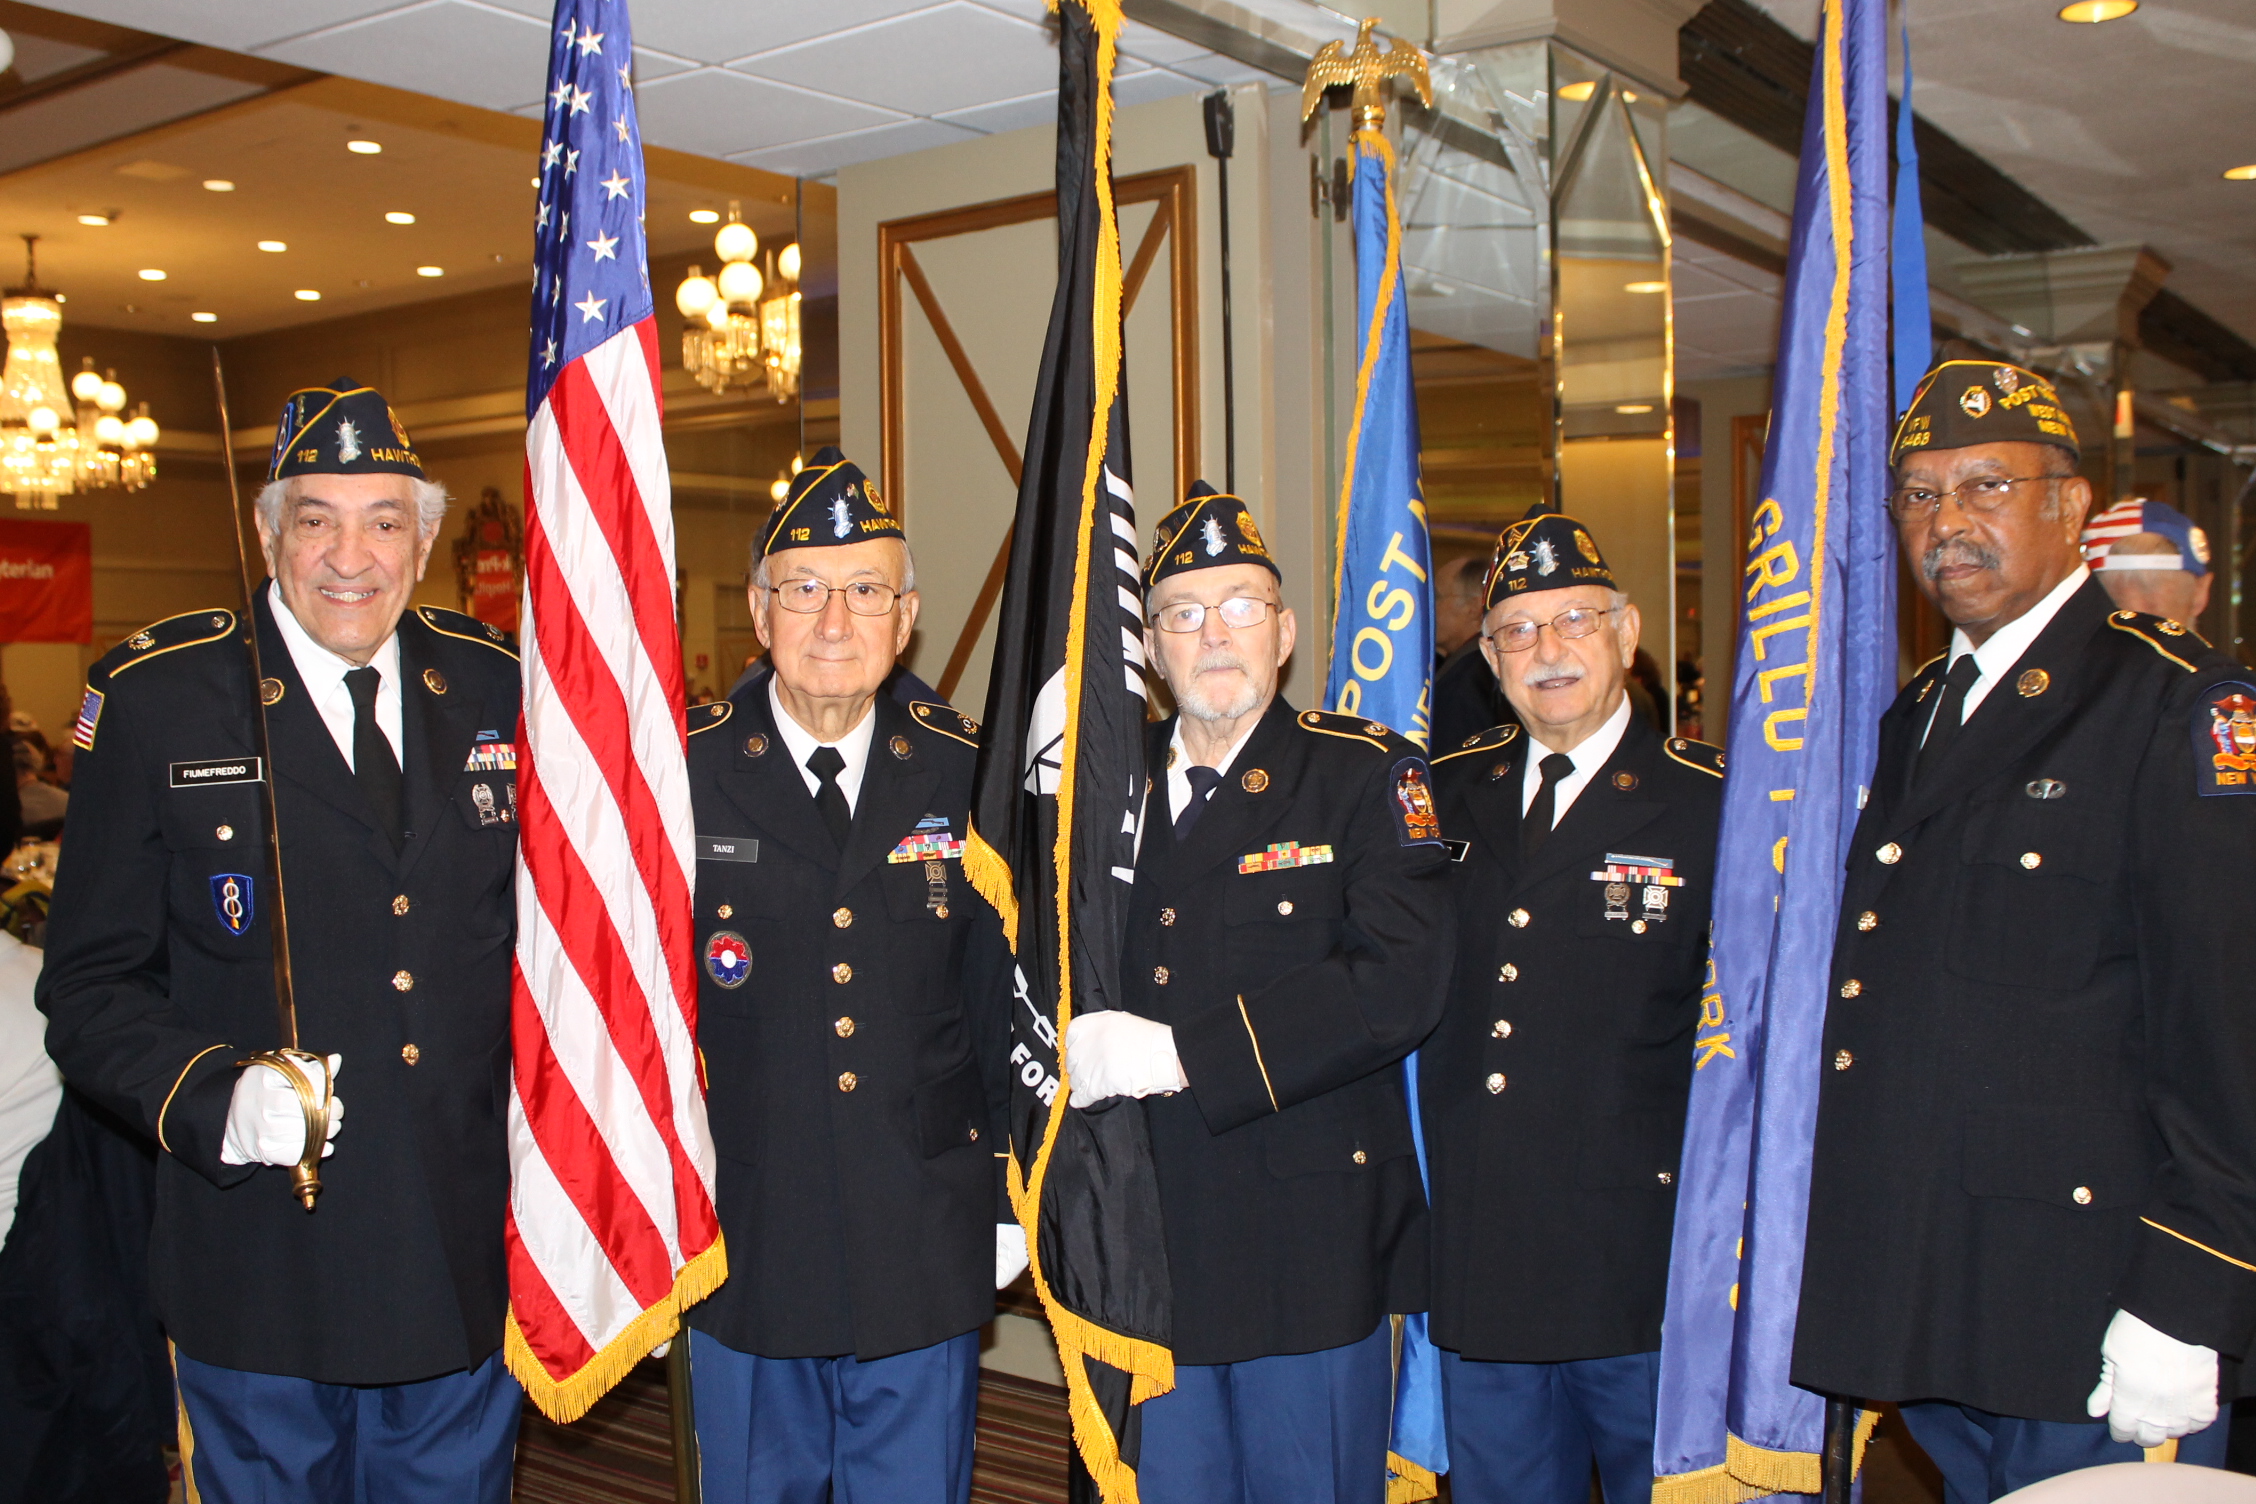 Hawthorne Post 112 American Legion Color Guard at the 10th Annual inter-hospice countywide Veterans Breakfast